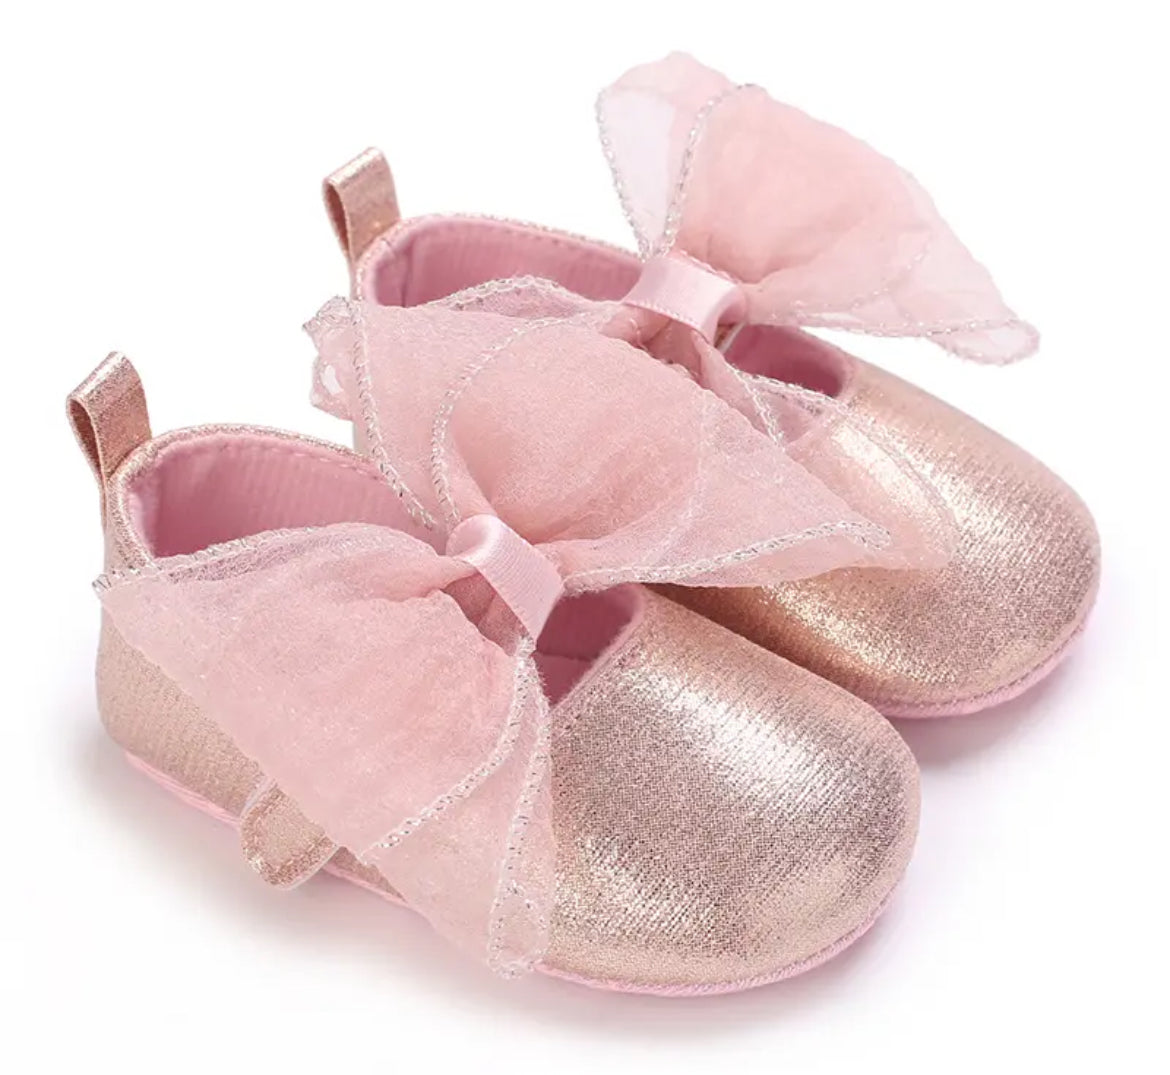 New Fashion Newborn Baby Flats, Pink Baby Shoes Non-slip Cloth Soled, Glam ✨ Baby Collection